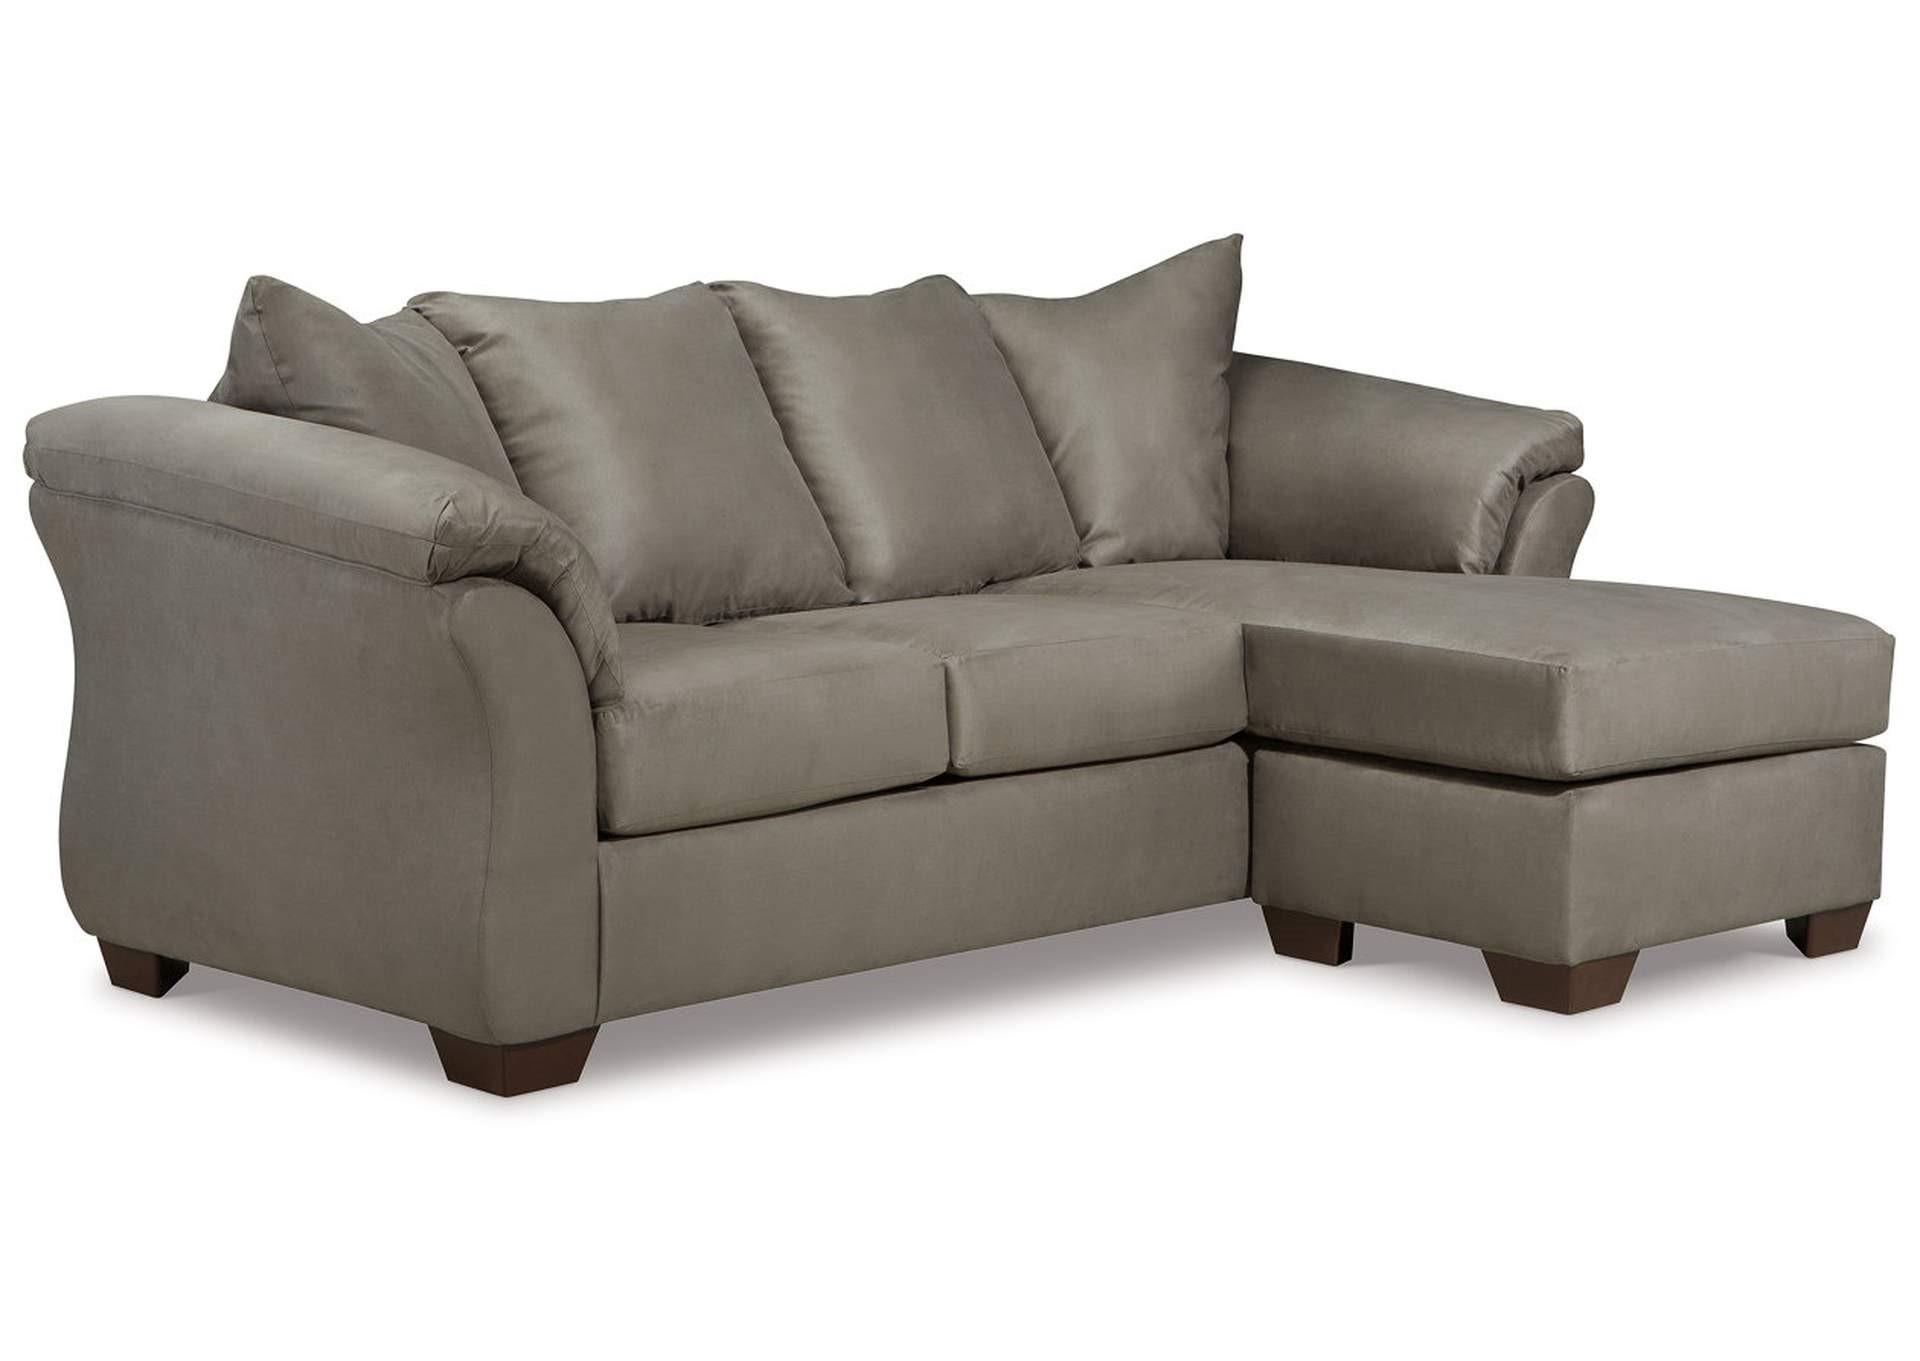 Tips for Pairing Darcy Sectional with Other Furniture Pieces